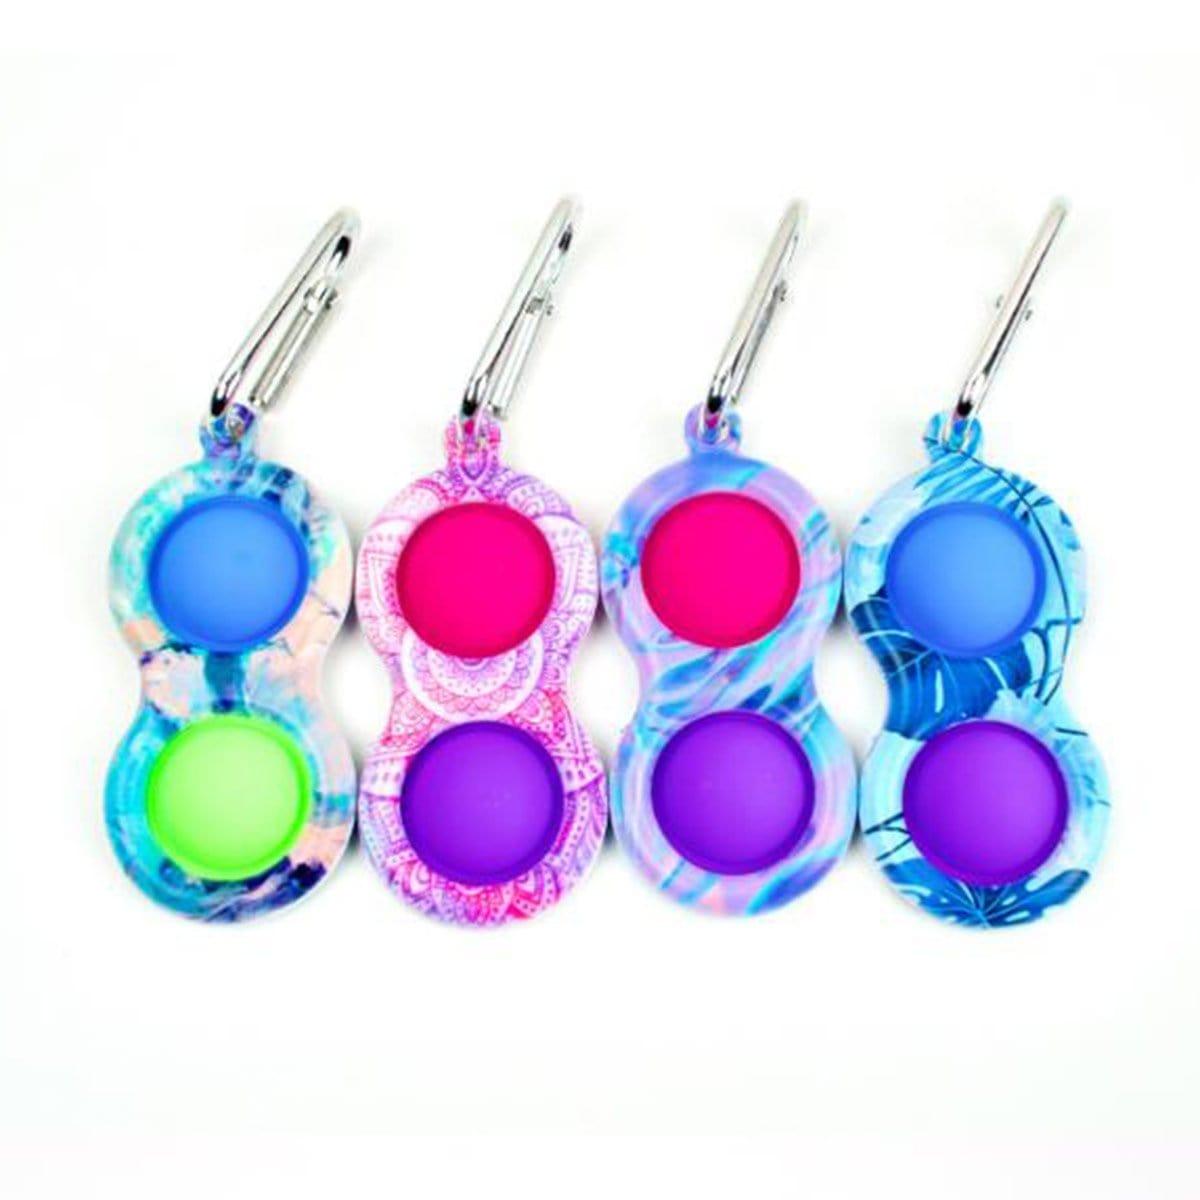 Buy Novelties Bubble Pop Keychain, Multicolor sold at Party Expert